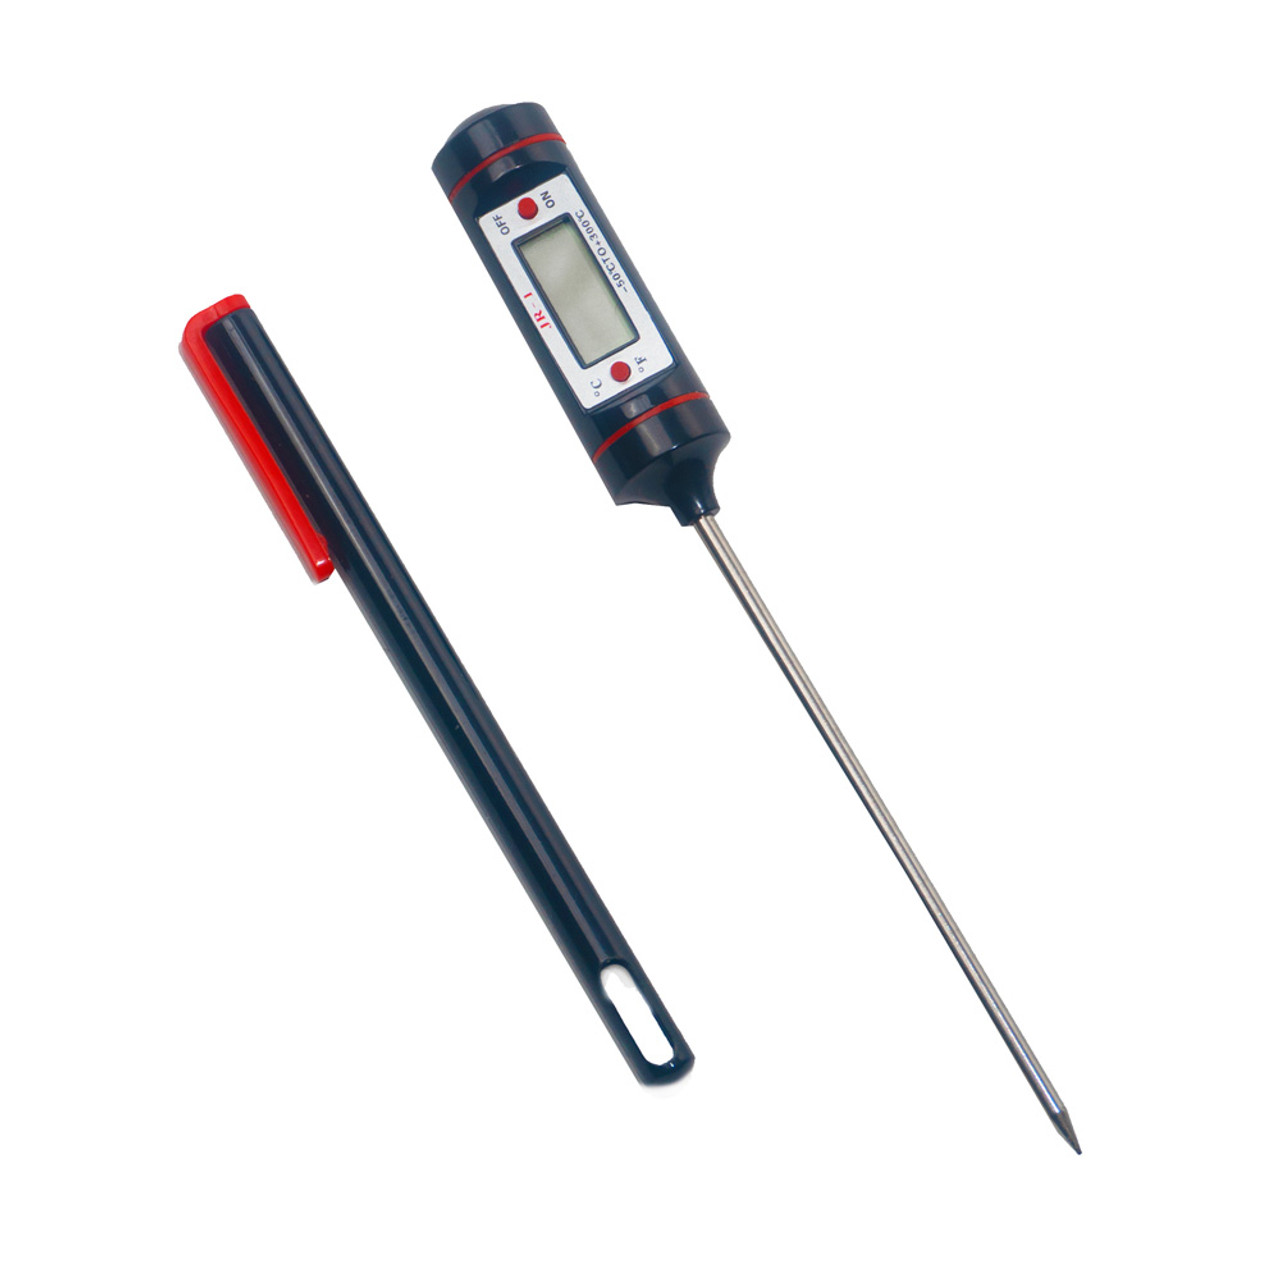 Immersion thermometers and measuring tips from the professionals